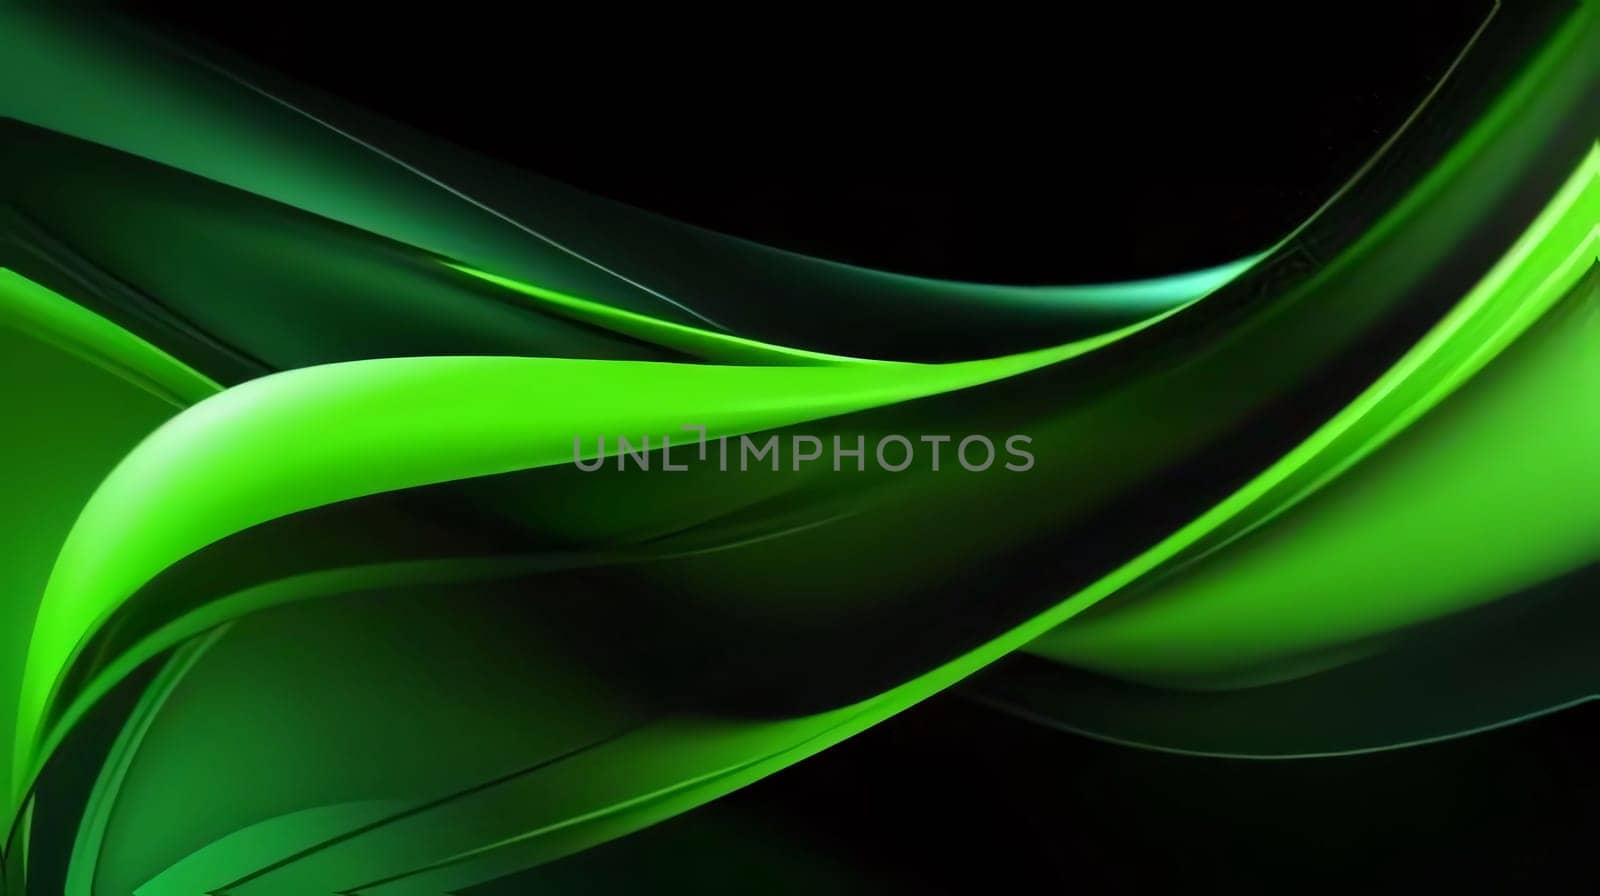 Abstract background design: abstract green background with smooth lines in it. 3d render